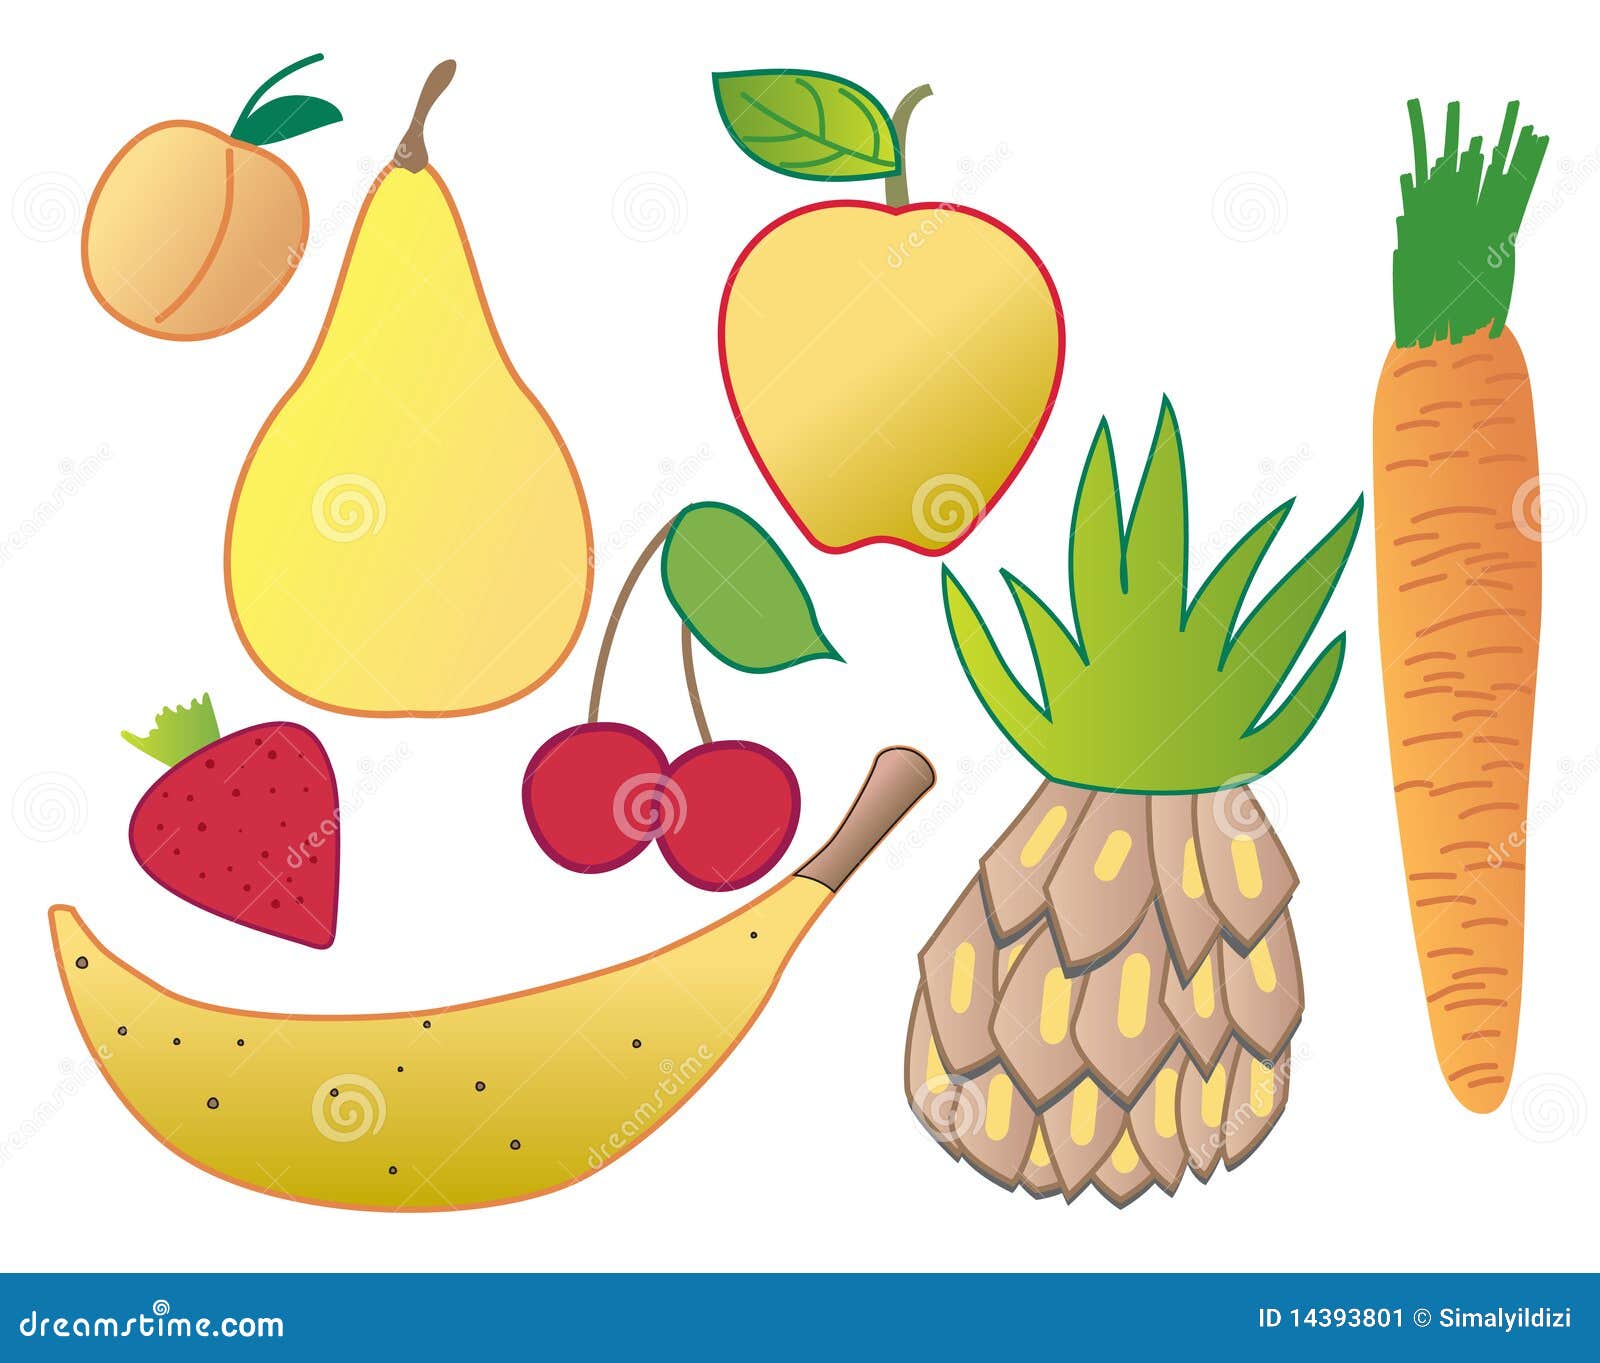 greengrocer clipart - photo #17